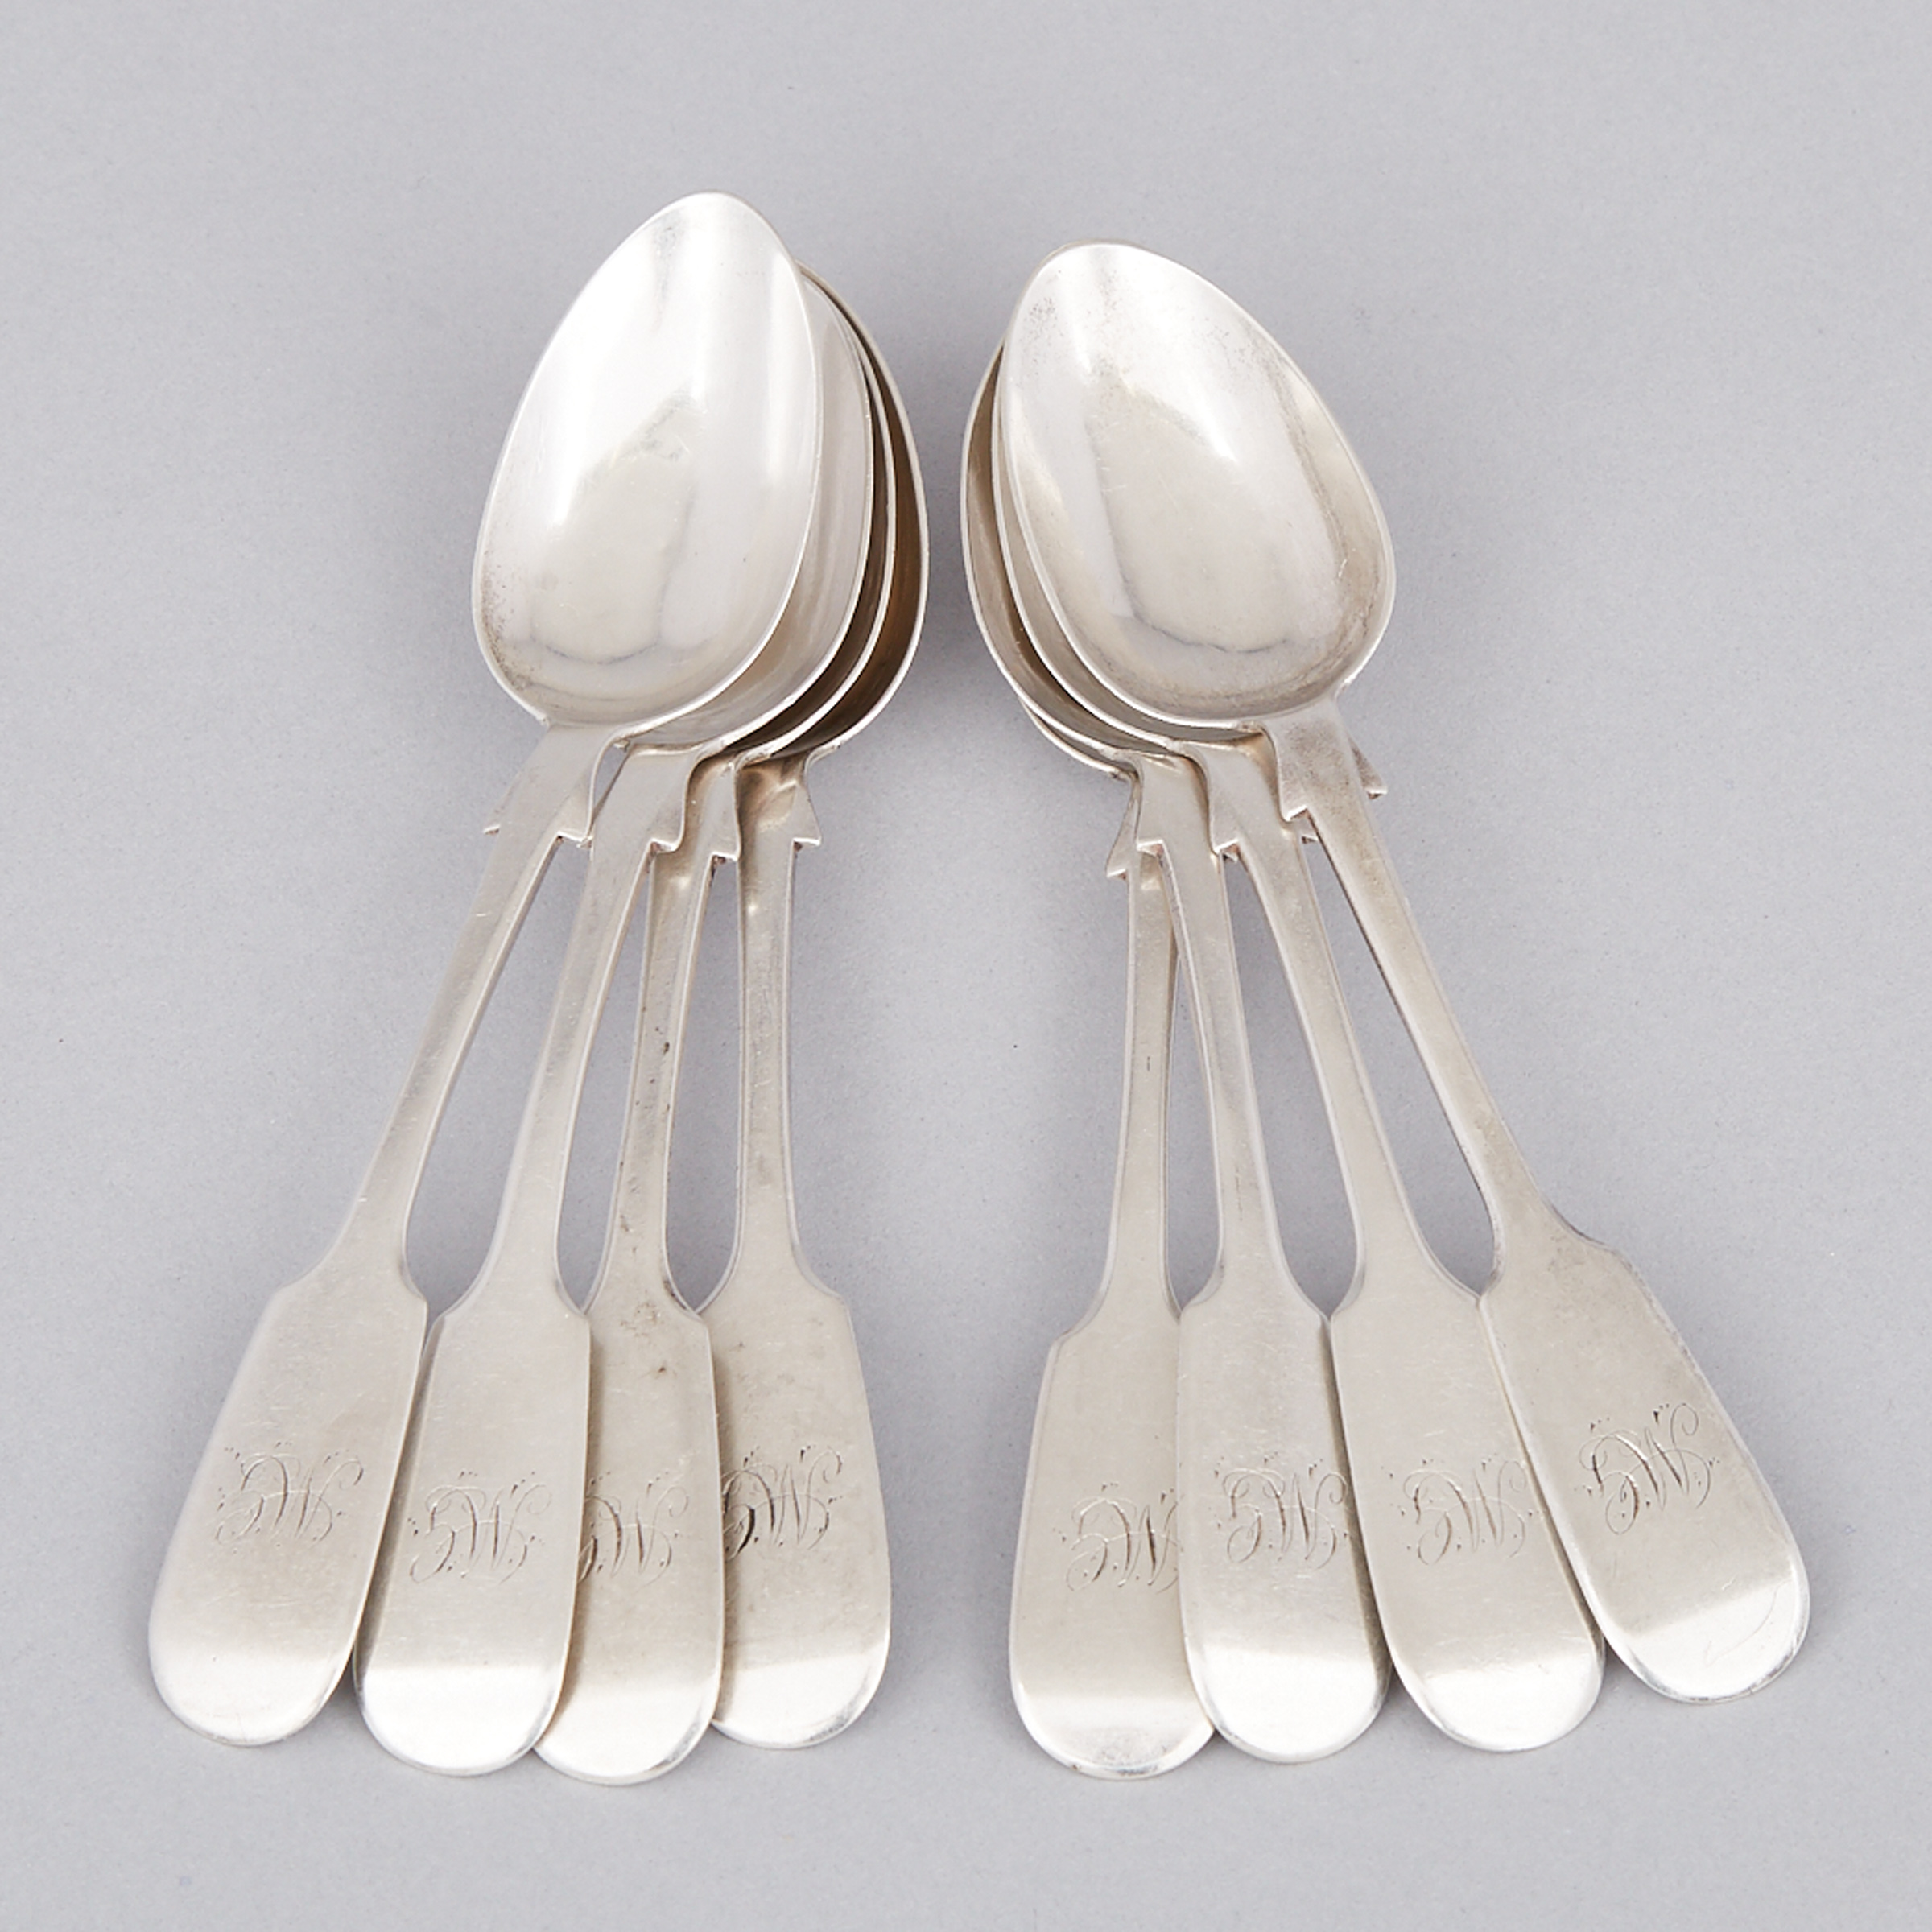 Eight Canadian Silver Fiddle Pattern Tea Spoons, Savage & Lyman, Montreal, Que., c.1867-78